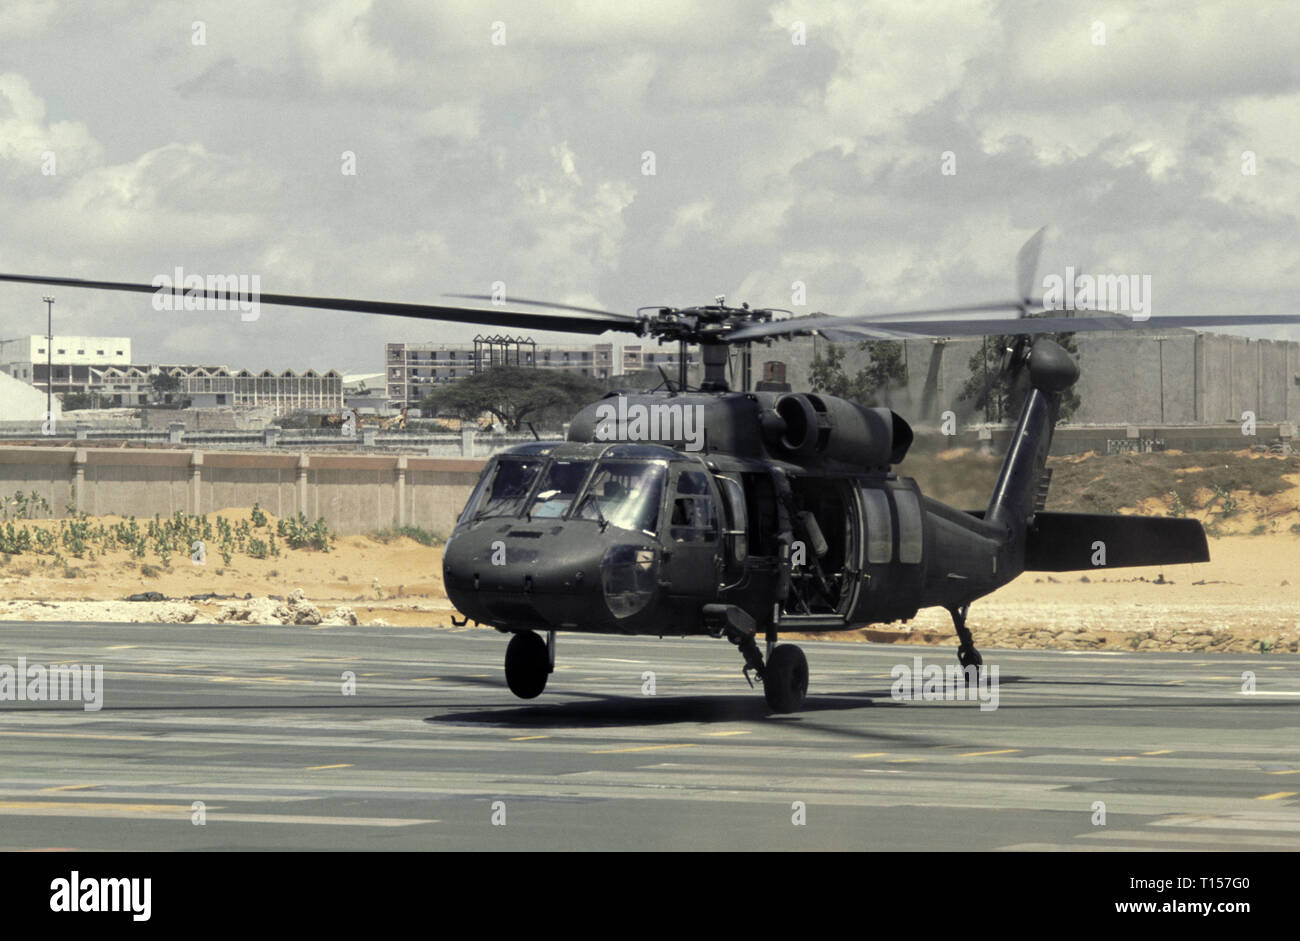 29th October 1993 A U.S. Army Sikorsky UH-60 Black Hawk helicopter landing at the UNOSOM headquarters compound in Mogadishu, Somalia. Stock Photo